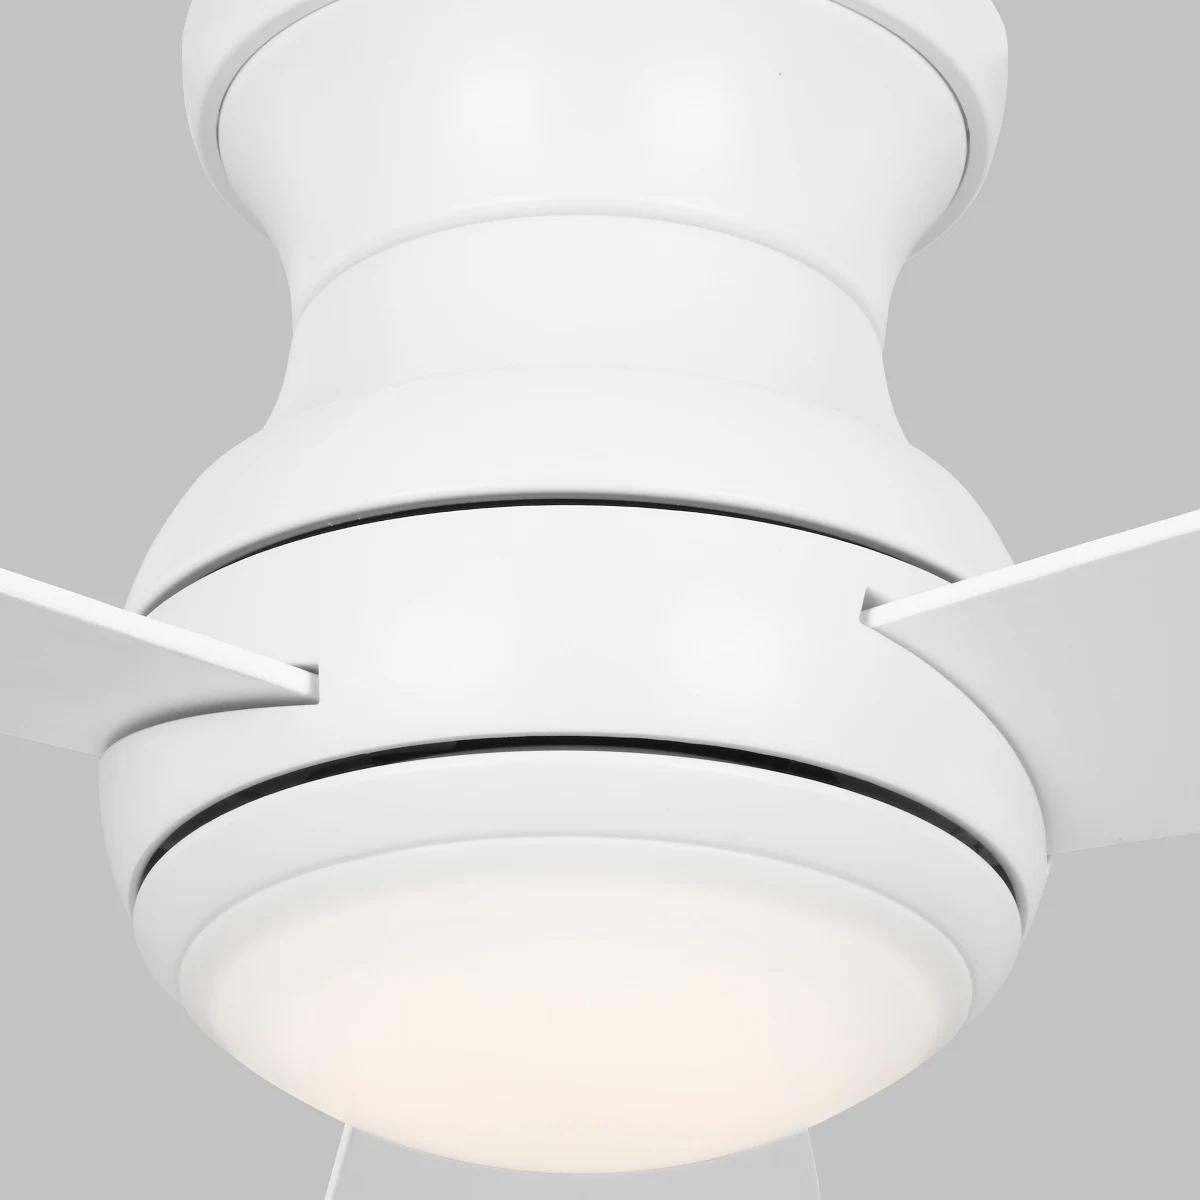 Orbis 52 Inch Hugger LED Ceiling Fan With Wall Control, Matte White Finish - Bees Lighting